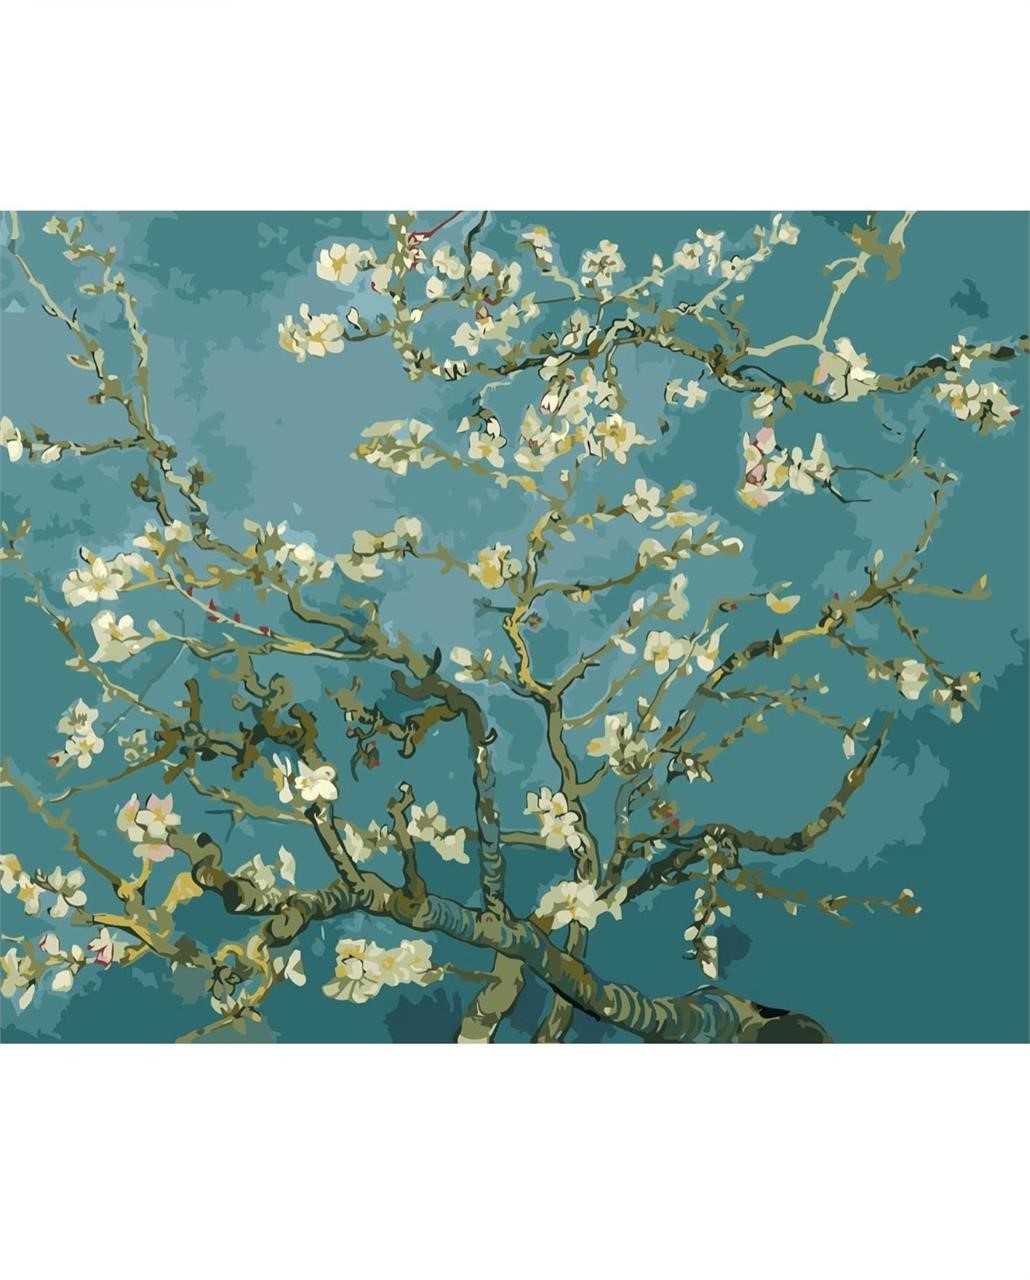 Almond Blossom Van Gogh Paint by numbers New